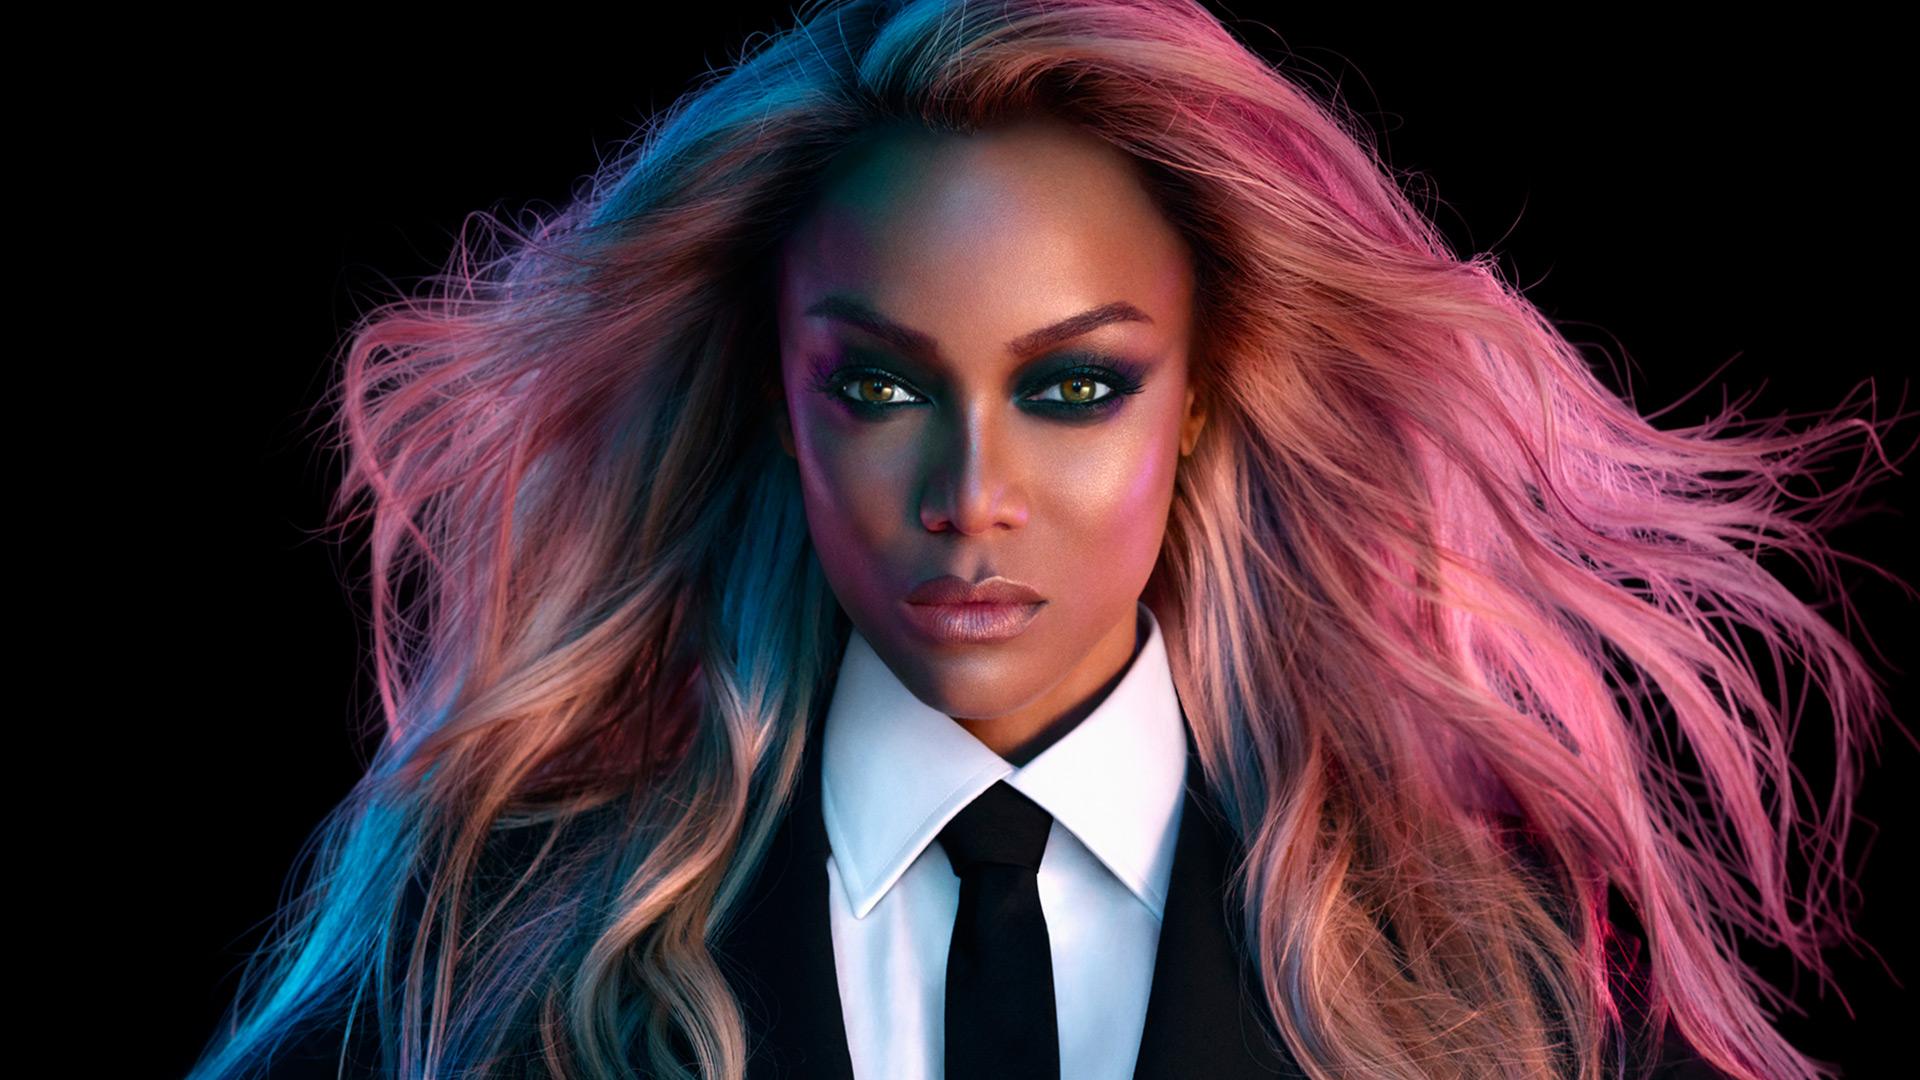 EXCLUSIVE: Tyra Banks Details How 'ANTM' Changed Modeling